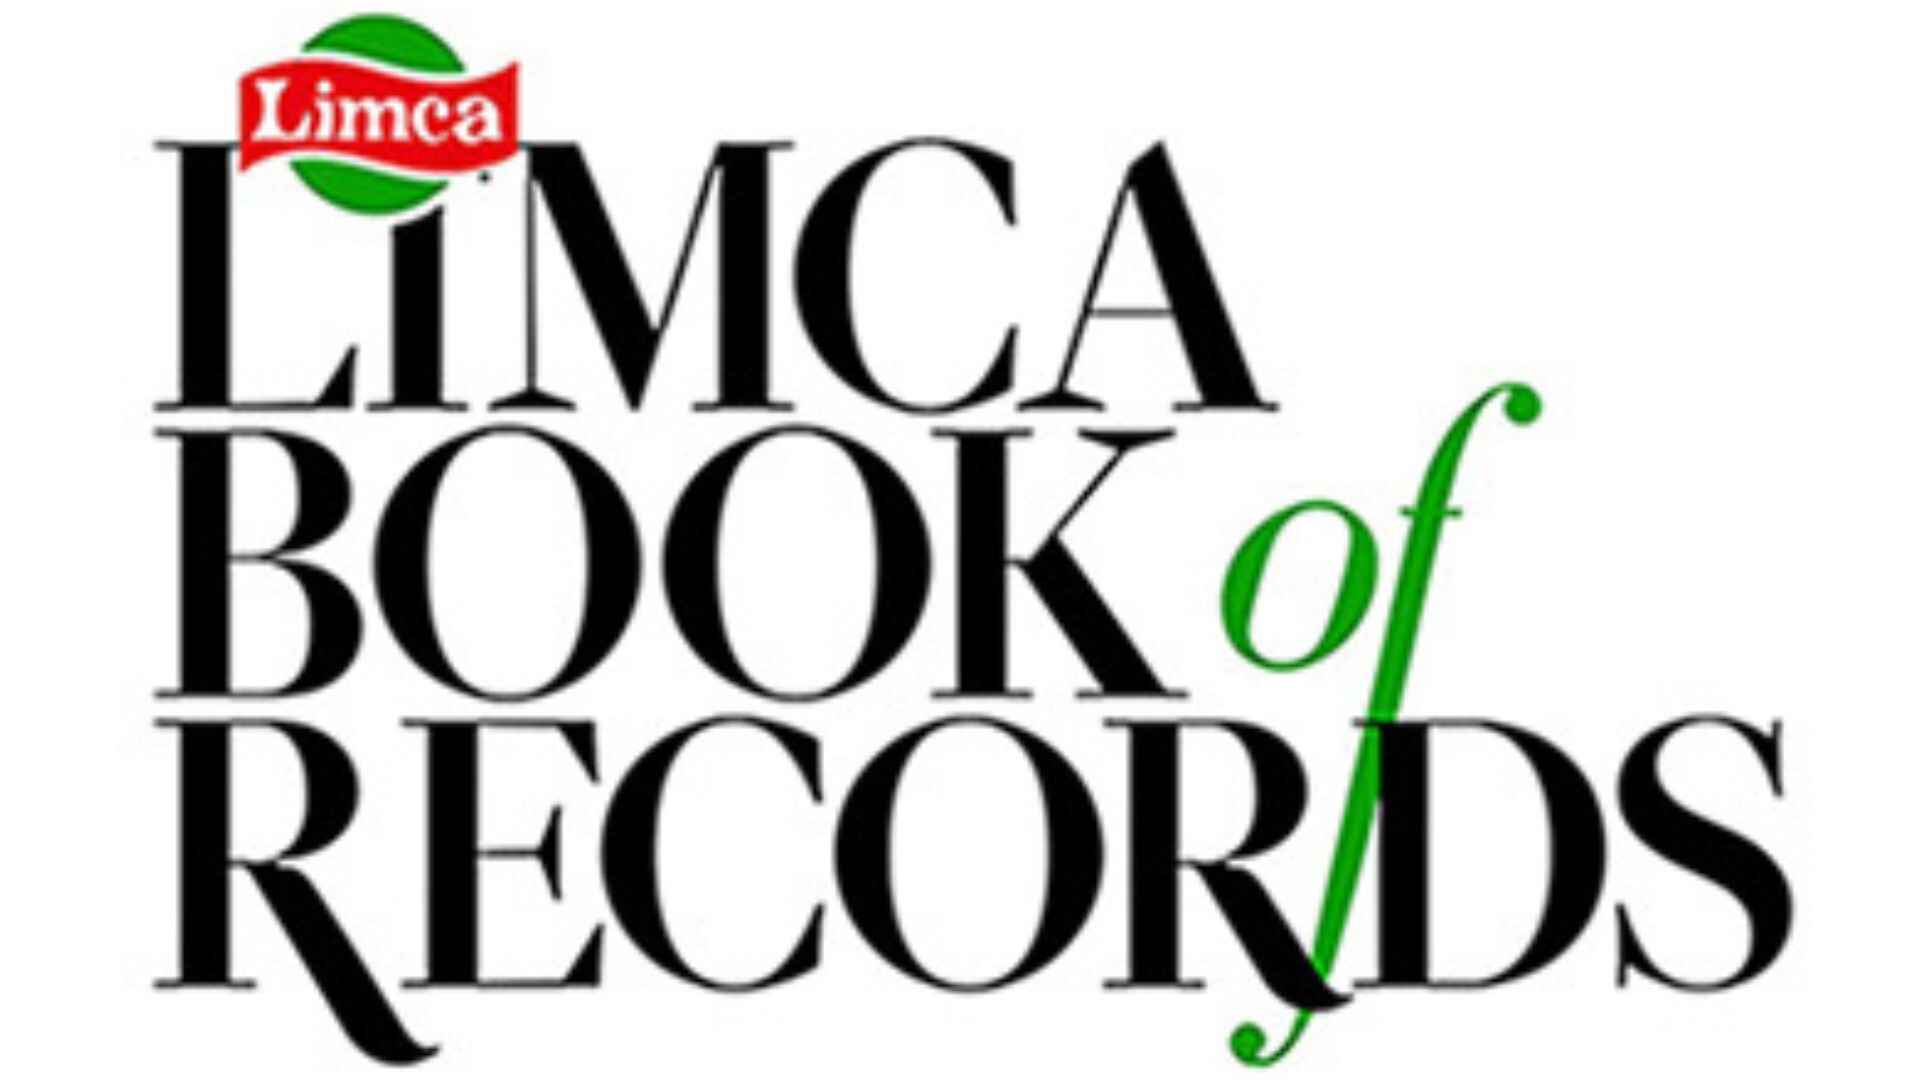 Ministry Of Railways Makes It To Limca Book Of Records For Largest Multi-Venue Public Service Event